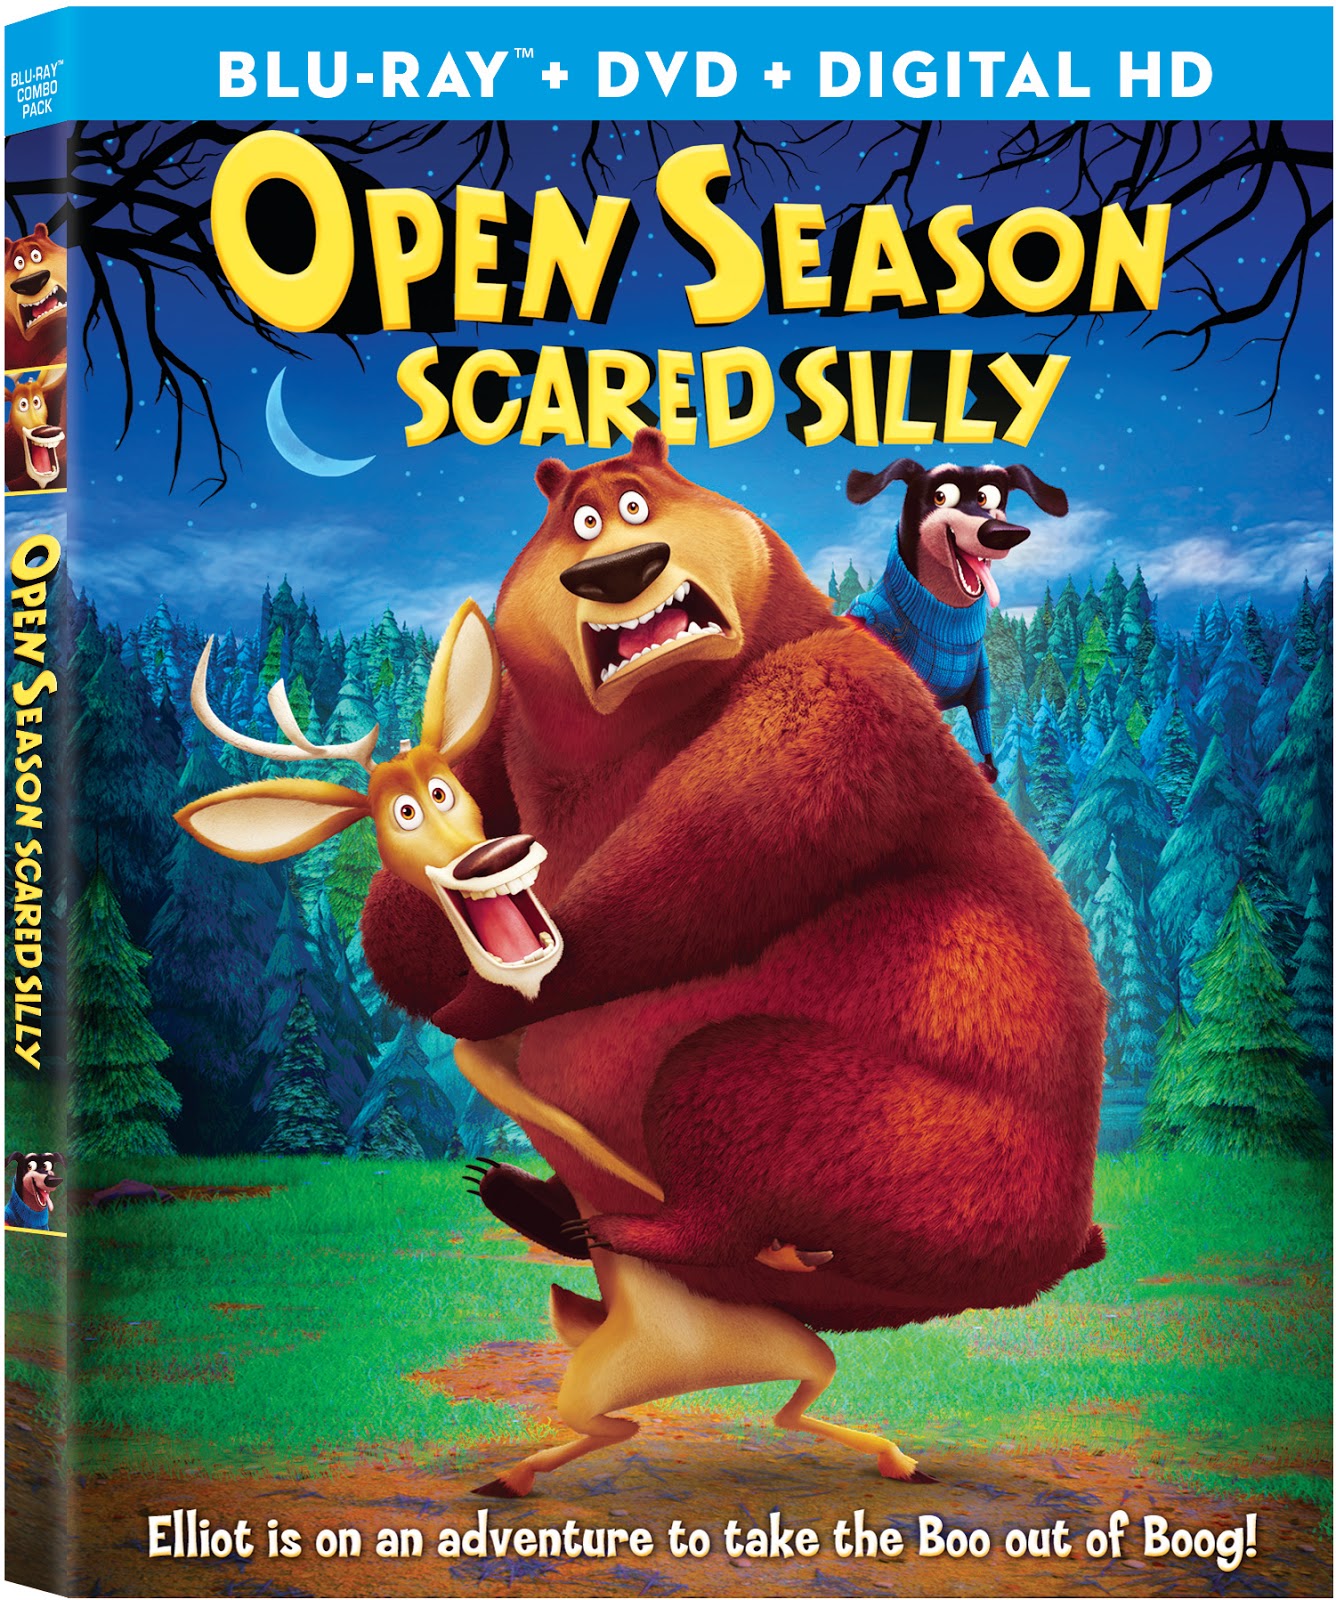 Danmark Dripping bud OPENSEASON Gets Scared Silly On March 8, 2016 - sandwichjohnfilms